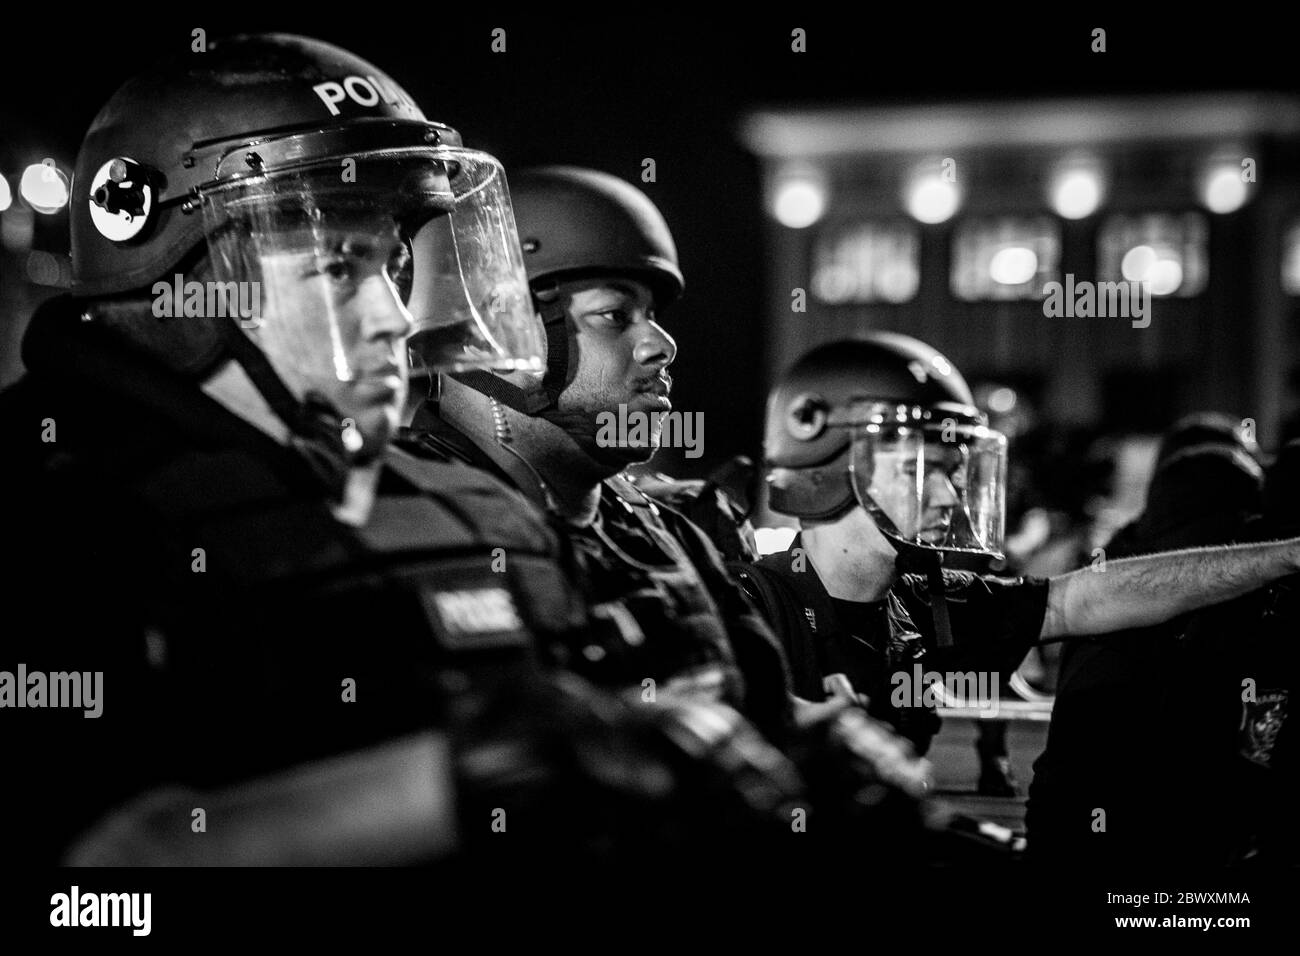 Hampton, Virginia, USA. 2nd June, 2020. Hampton police and Hampton Sheriff deputies stood together in formation at the Peninsula Town Center on Tuesday June 2, 2020 in Hampton, VA. Local law enforcement from Hampton Police Department, Hampton Sheriff's Office, Newport News Police Department, Virginia State Police were on scene at the protest. Credit: John C. Clark/ZUMA Wire/Alamy Live News Stock Photo